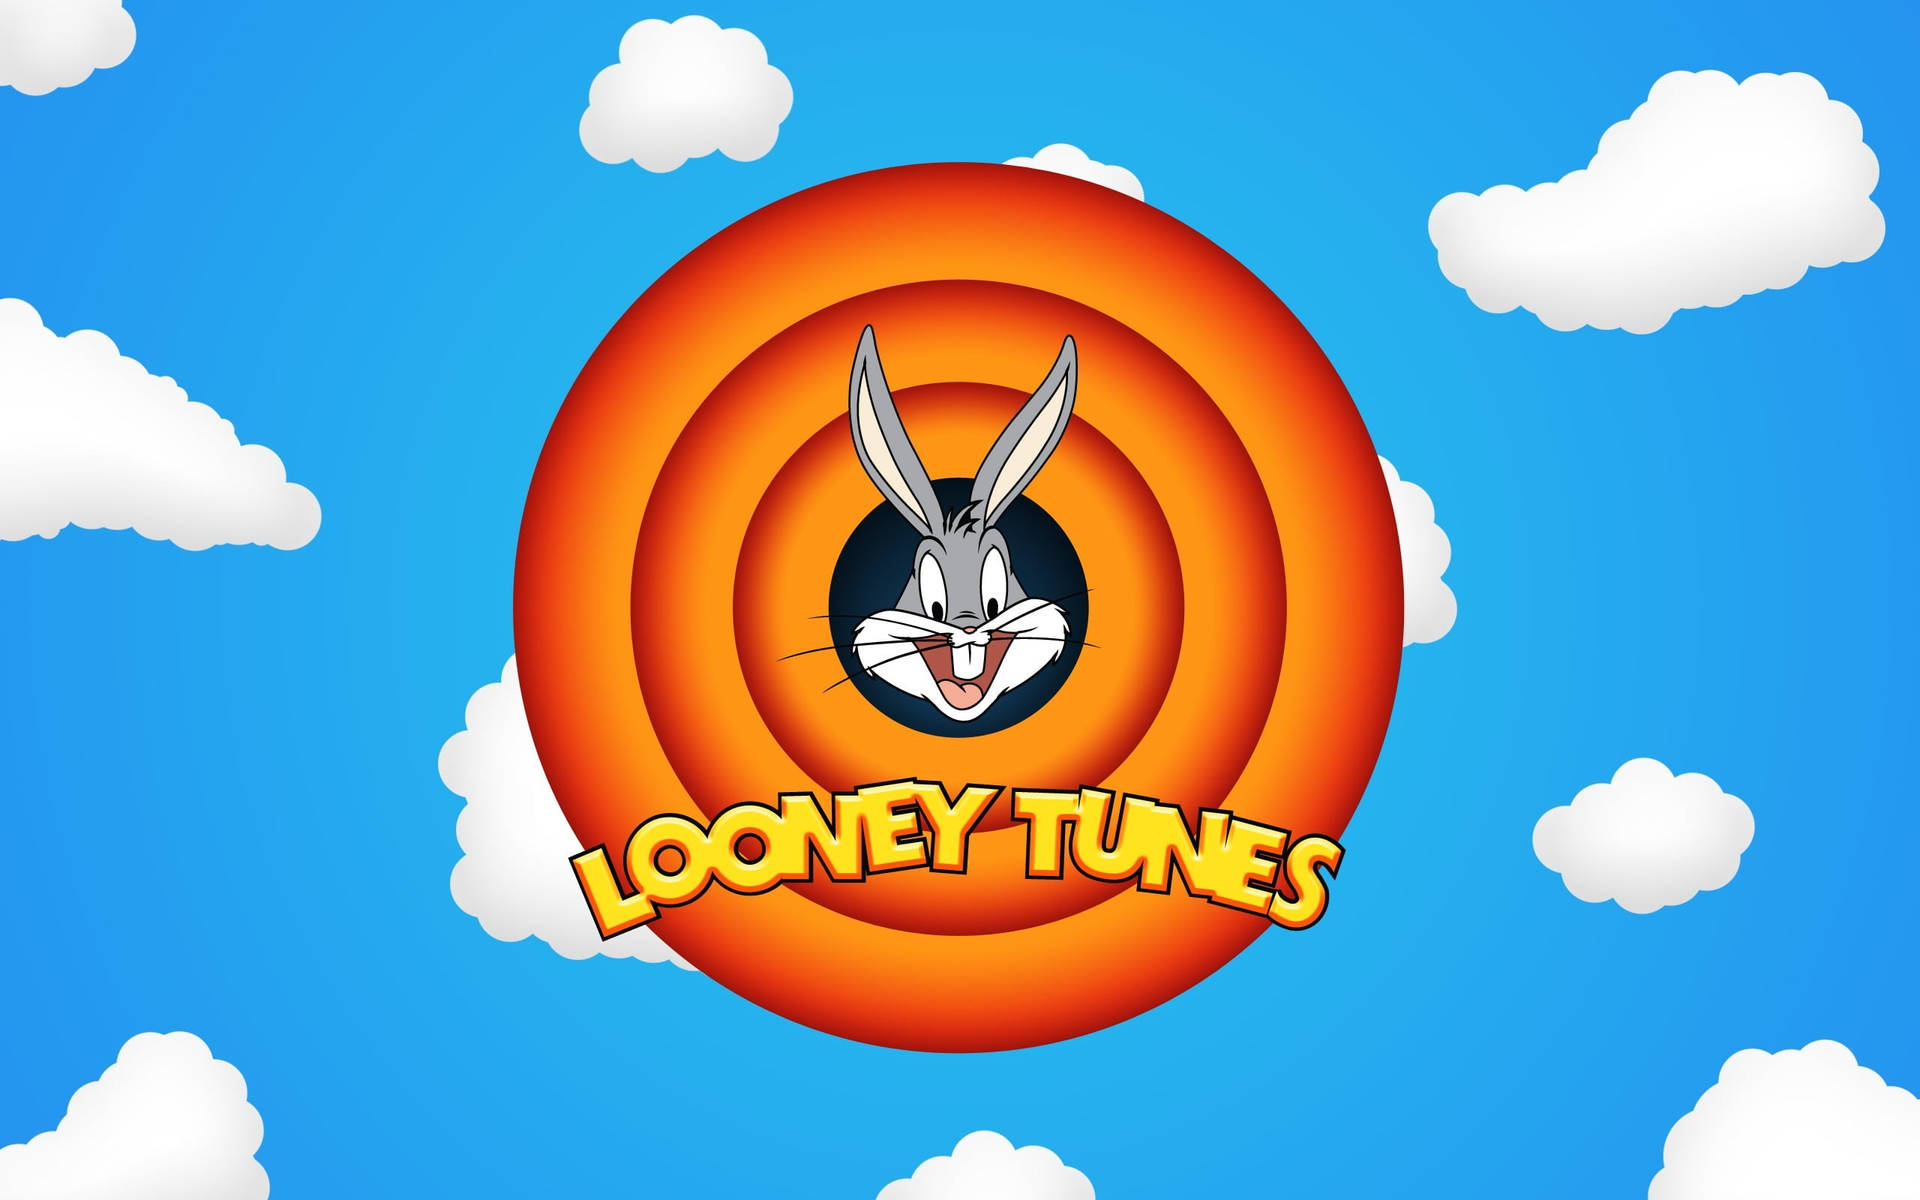 Top 999+ Looney Tunes Wallpaper Full HD, 4K Free to Use